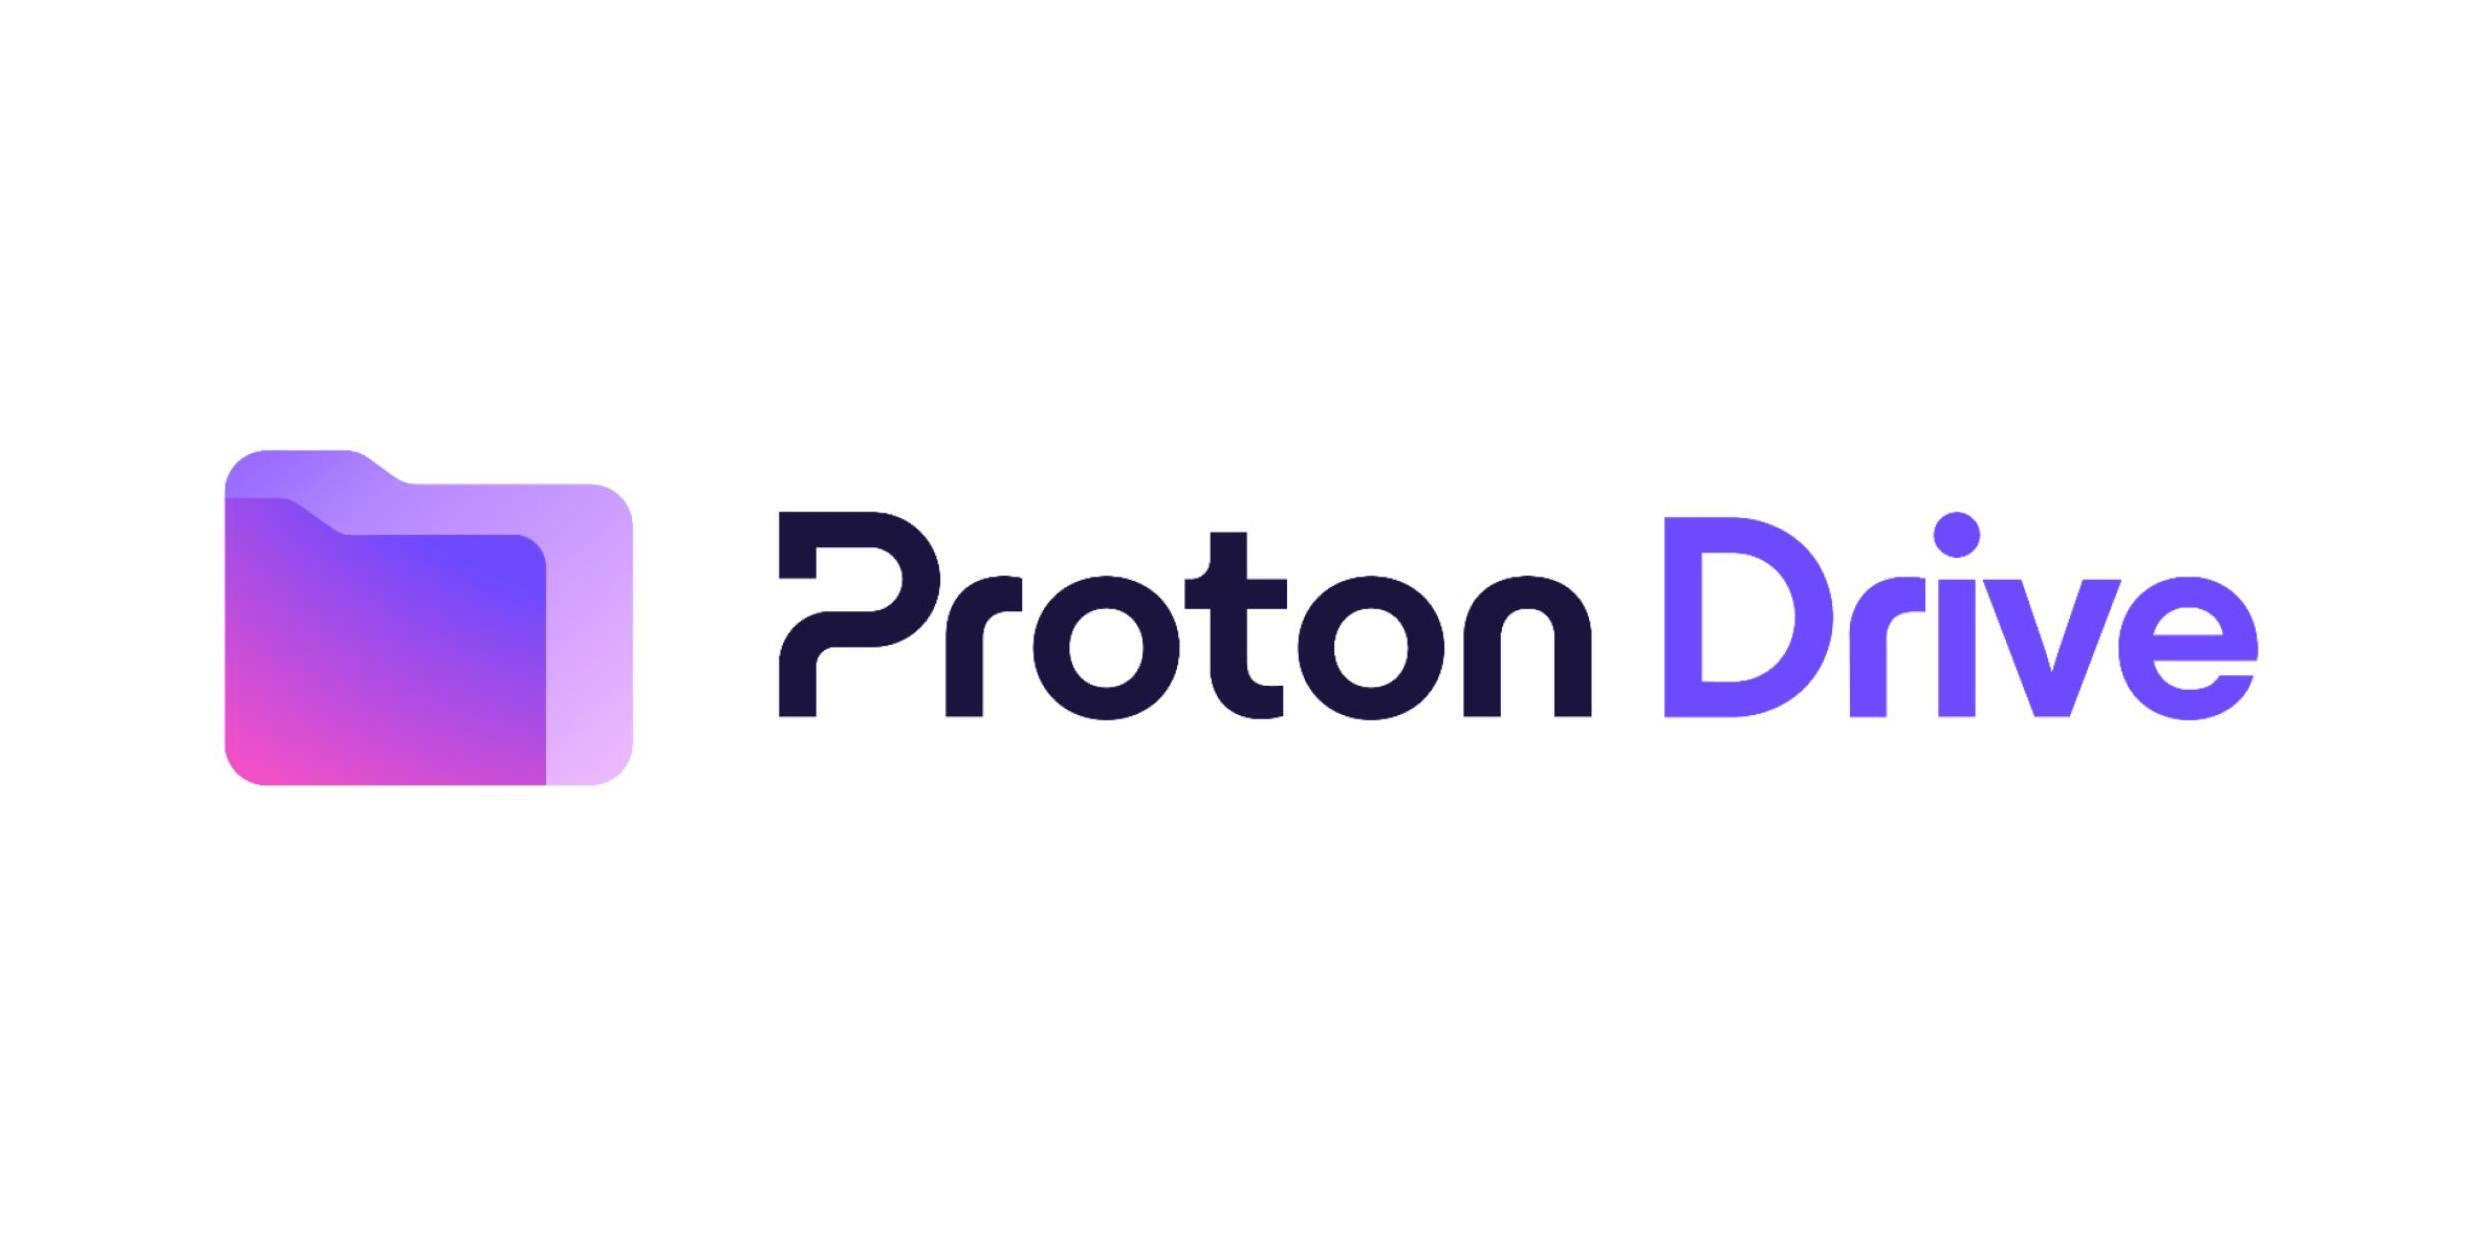 How to Fix "Cannot Upload: File No Longer Exists" Error on Proton Drive ? 1